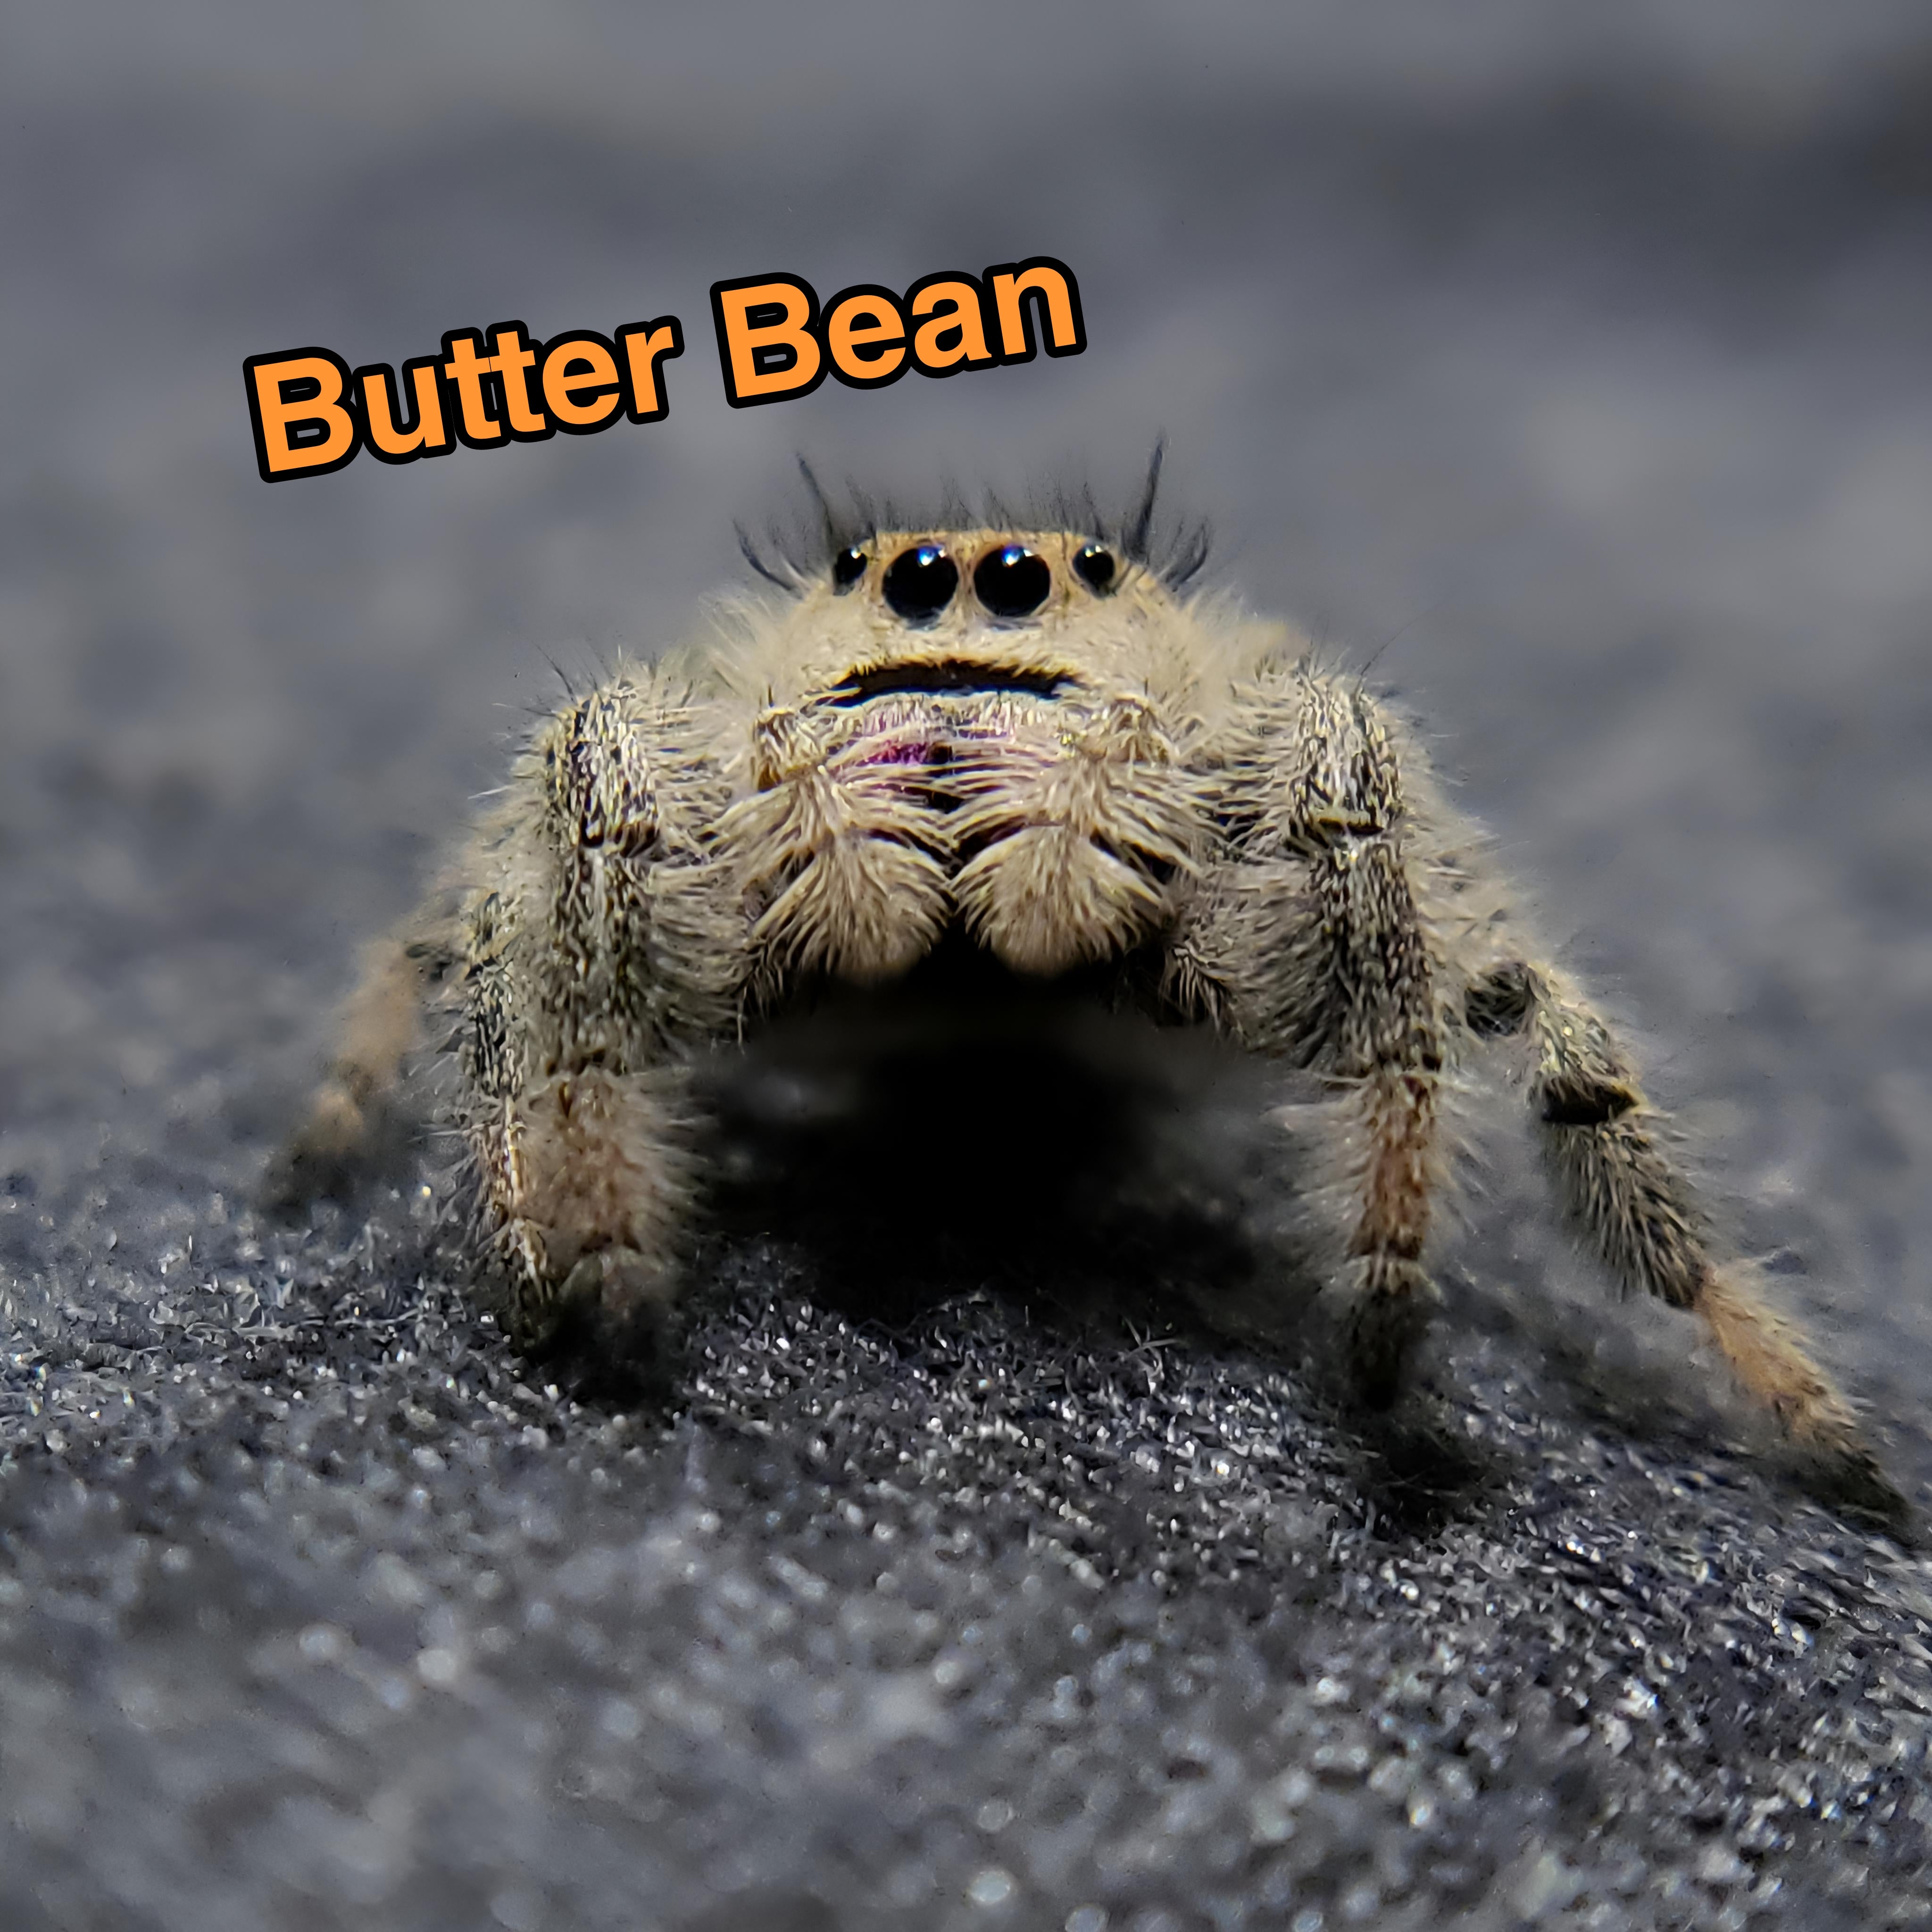 Jumping Spider For Sale, Butter Bean, Salticidae